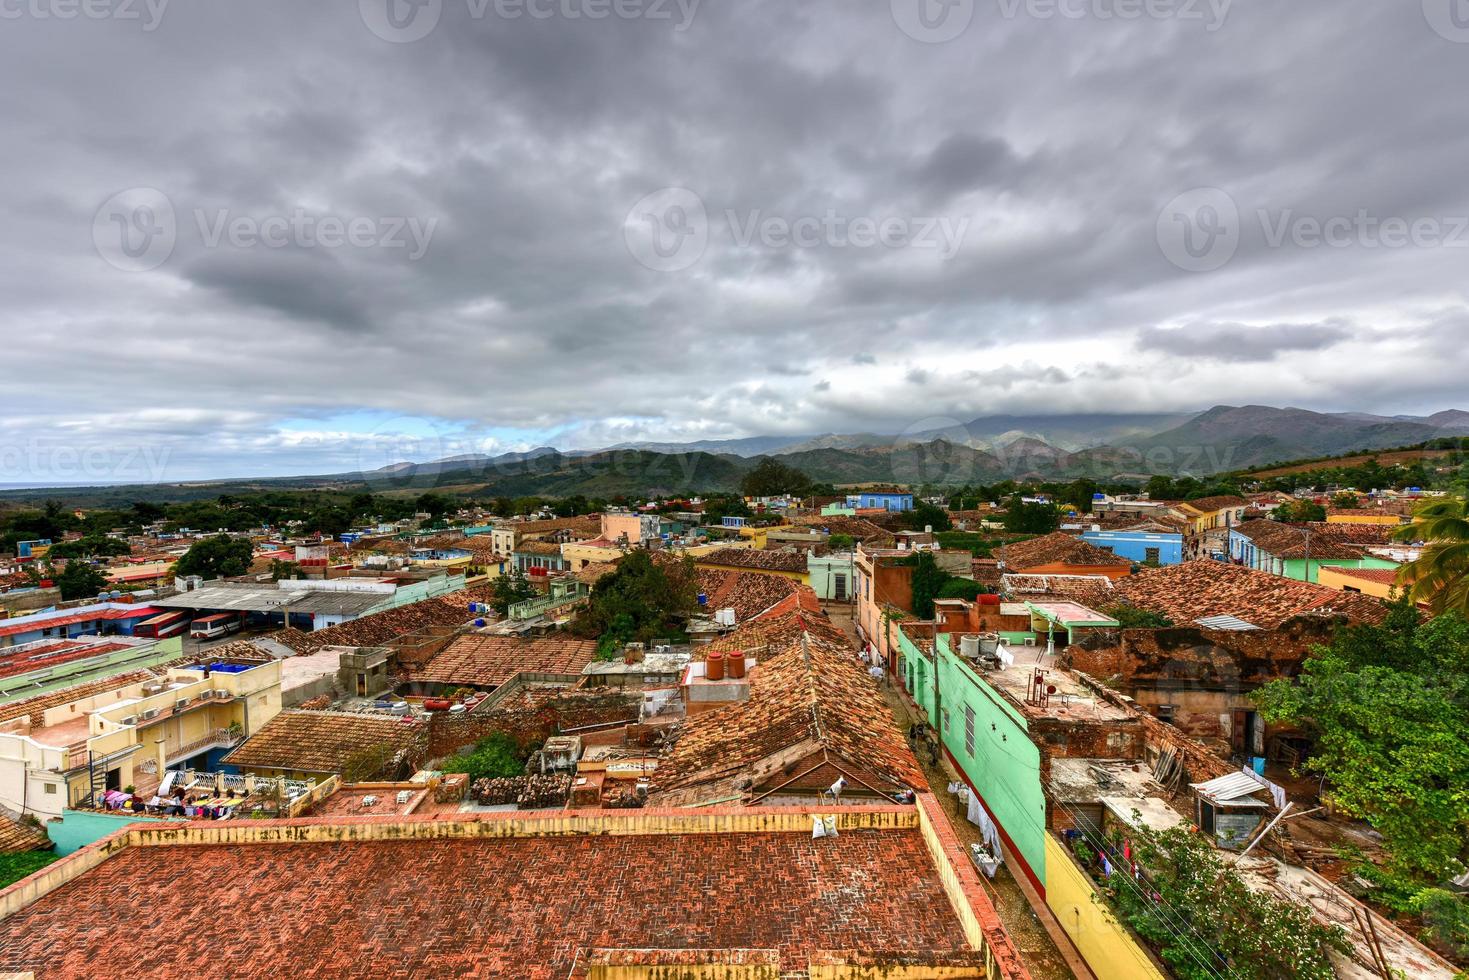 Panoramic view over the old part of Trinidad, Cuba, a UNESCO world heritage site. photo